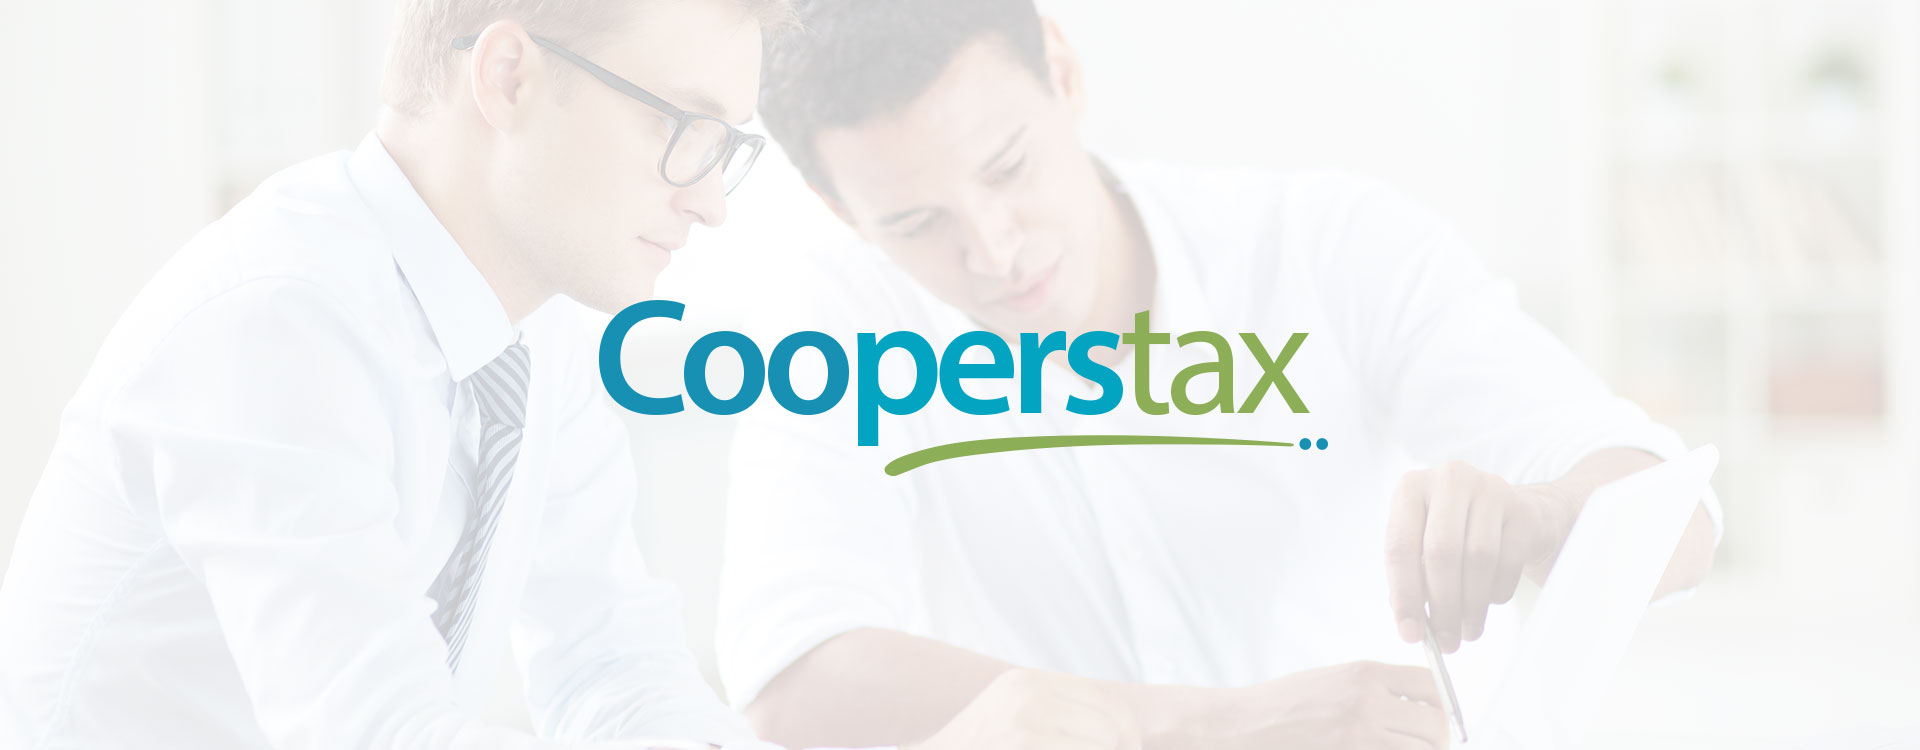 Logo design for Cooperstax, a tax advisory firm